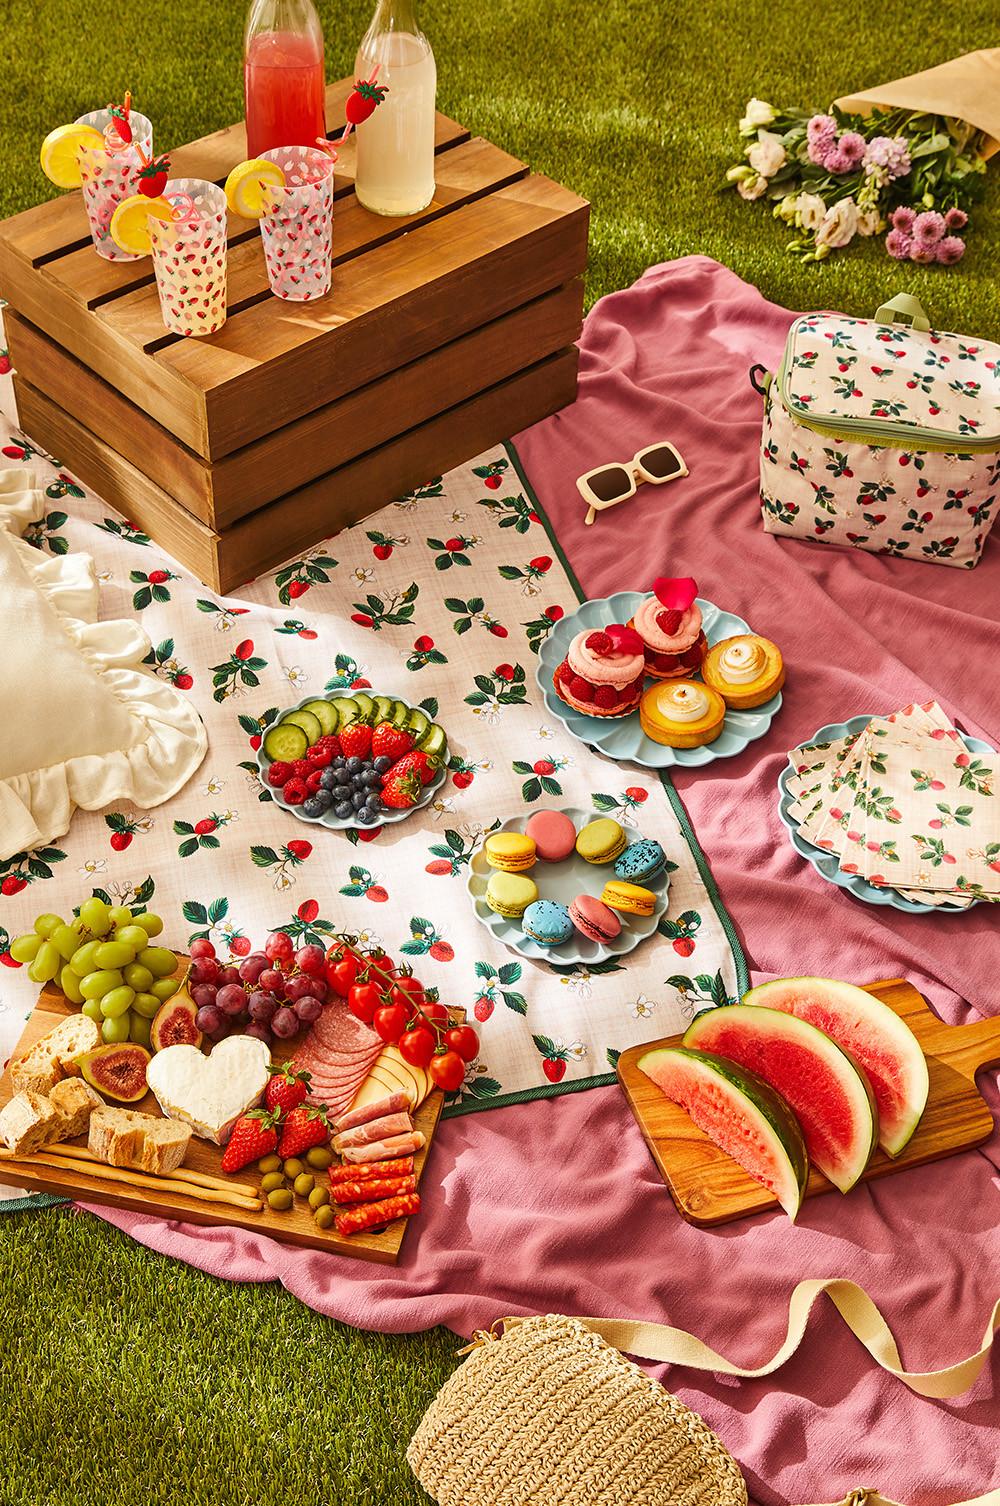 Garden picnic set up, with blankets, cool bags, plates and cups